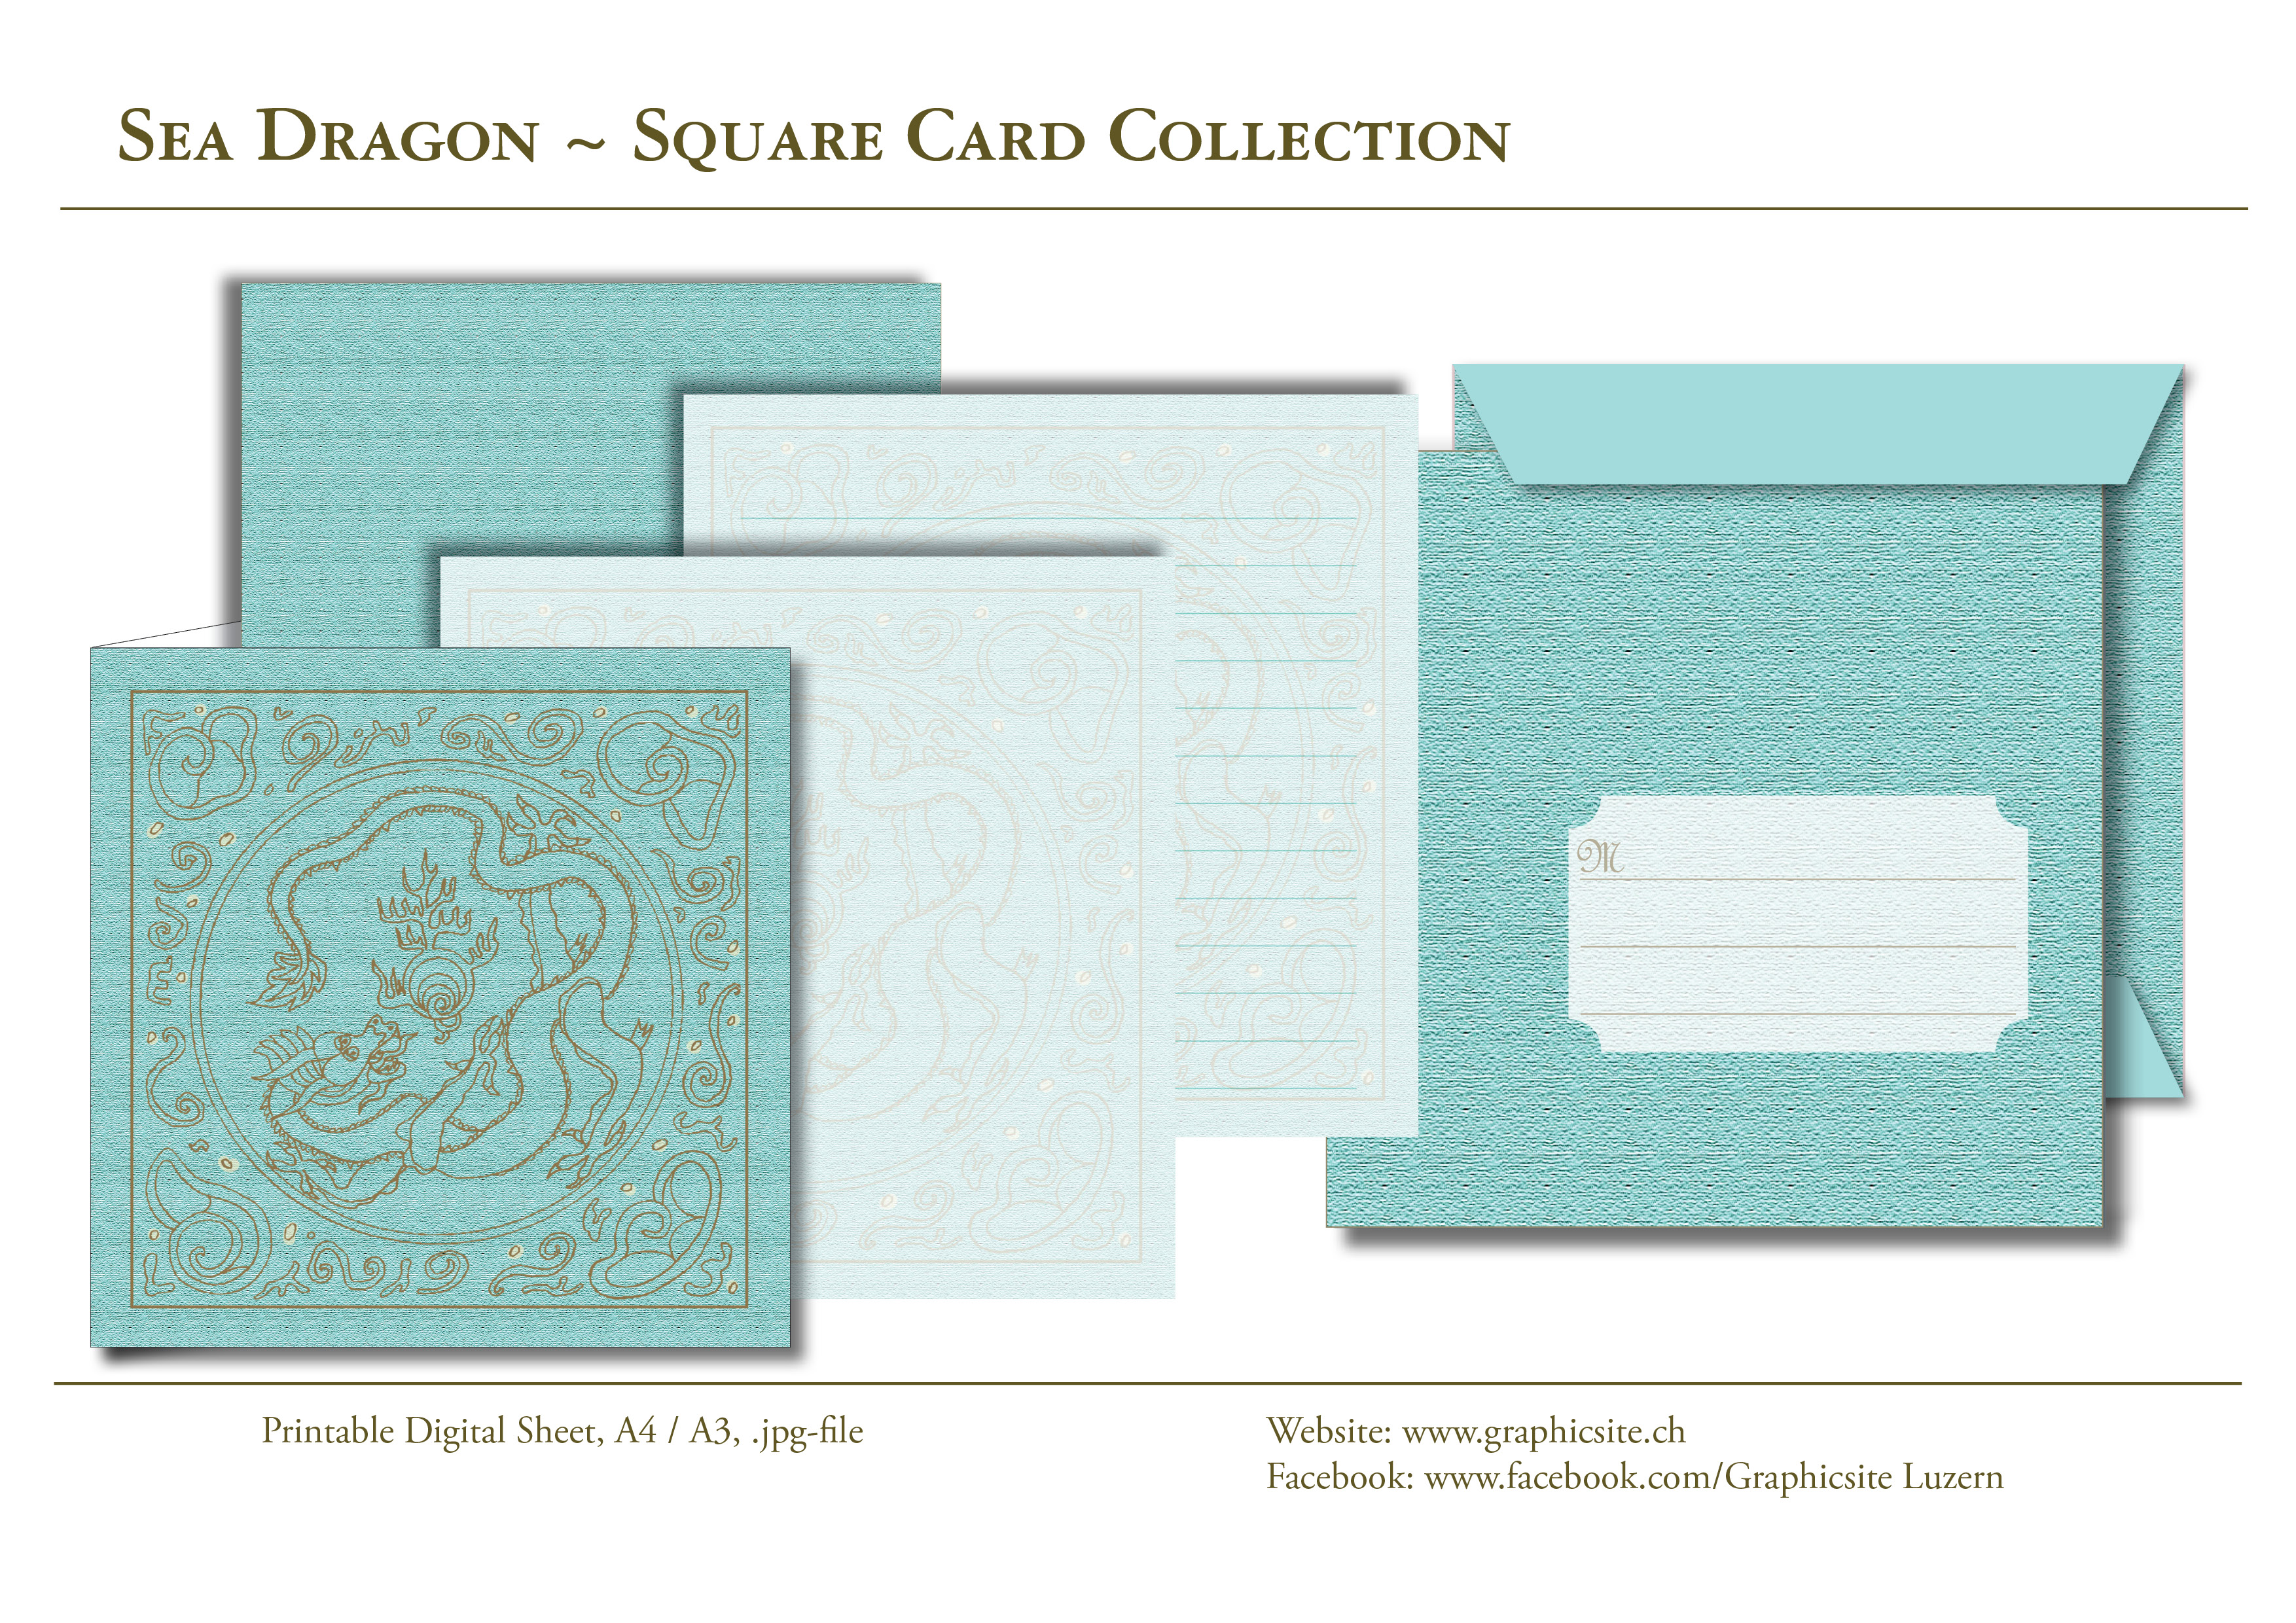 Printable Digital Sheets, Greeting Cards, Square Cards, Sea, Ocean, Dragon, Turquoise,